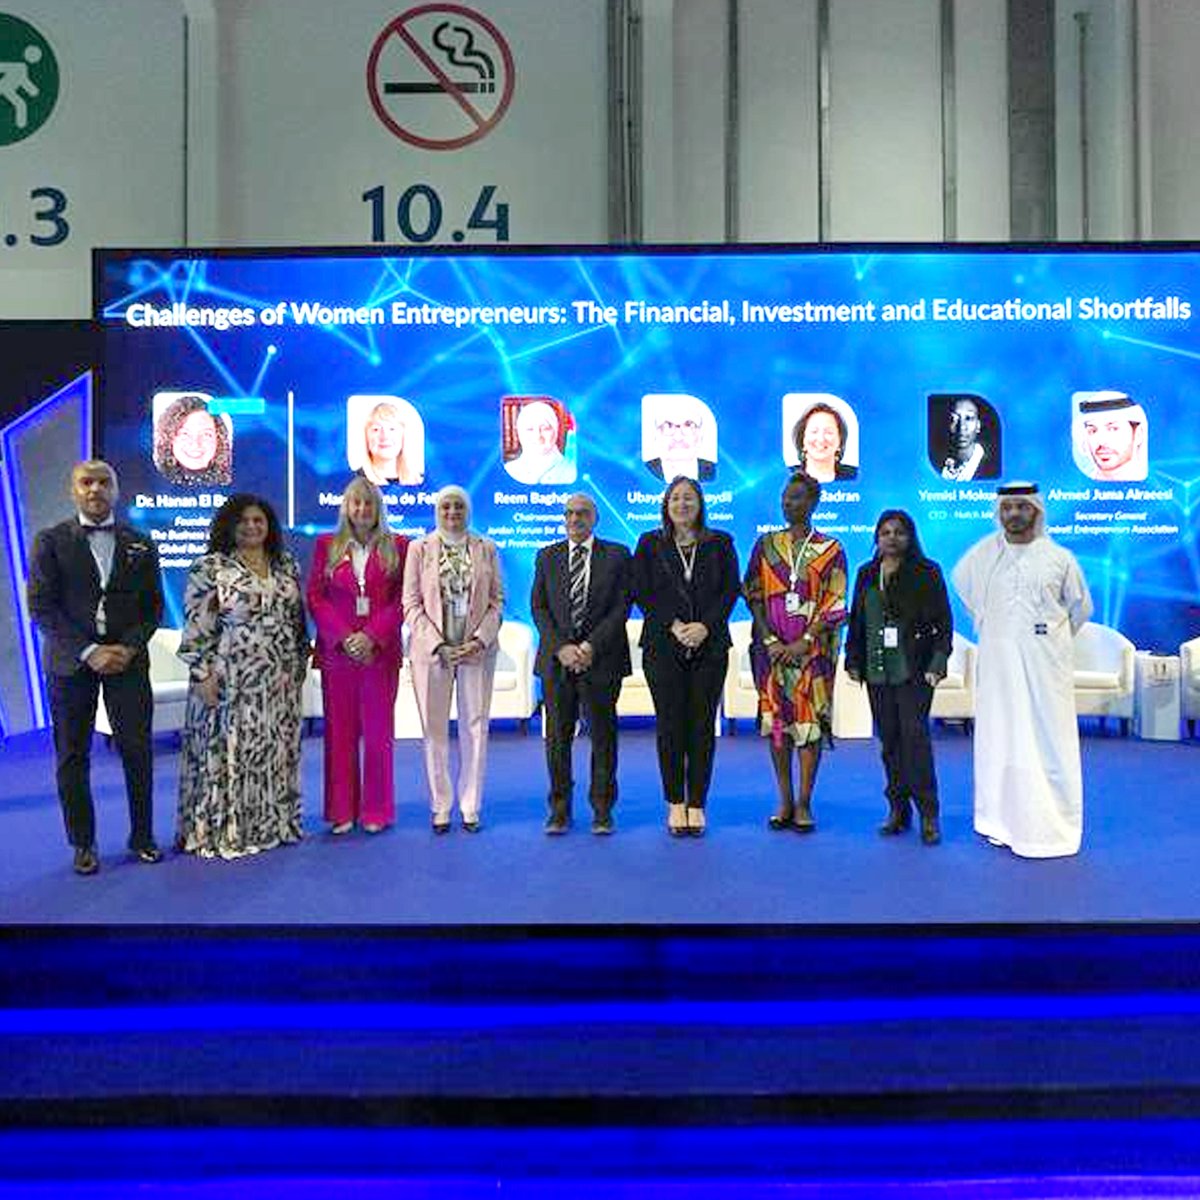 It is an honor to participate in the #AIM2023 in Abu Dhabi, one of the top investment forums in the UAE. Highlighting the importance of women entrepreneurs in Euro-Meda region, and how civil society networks can contribute to the overall success of businesses in these areas